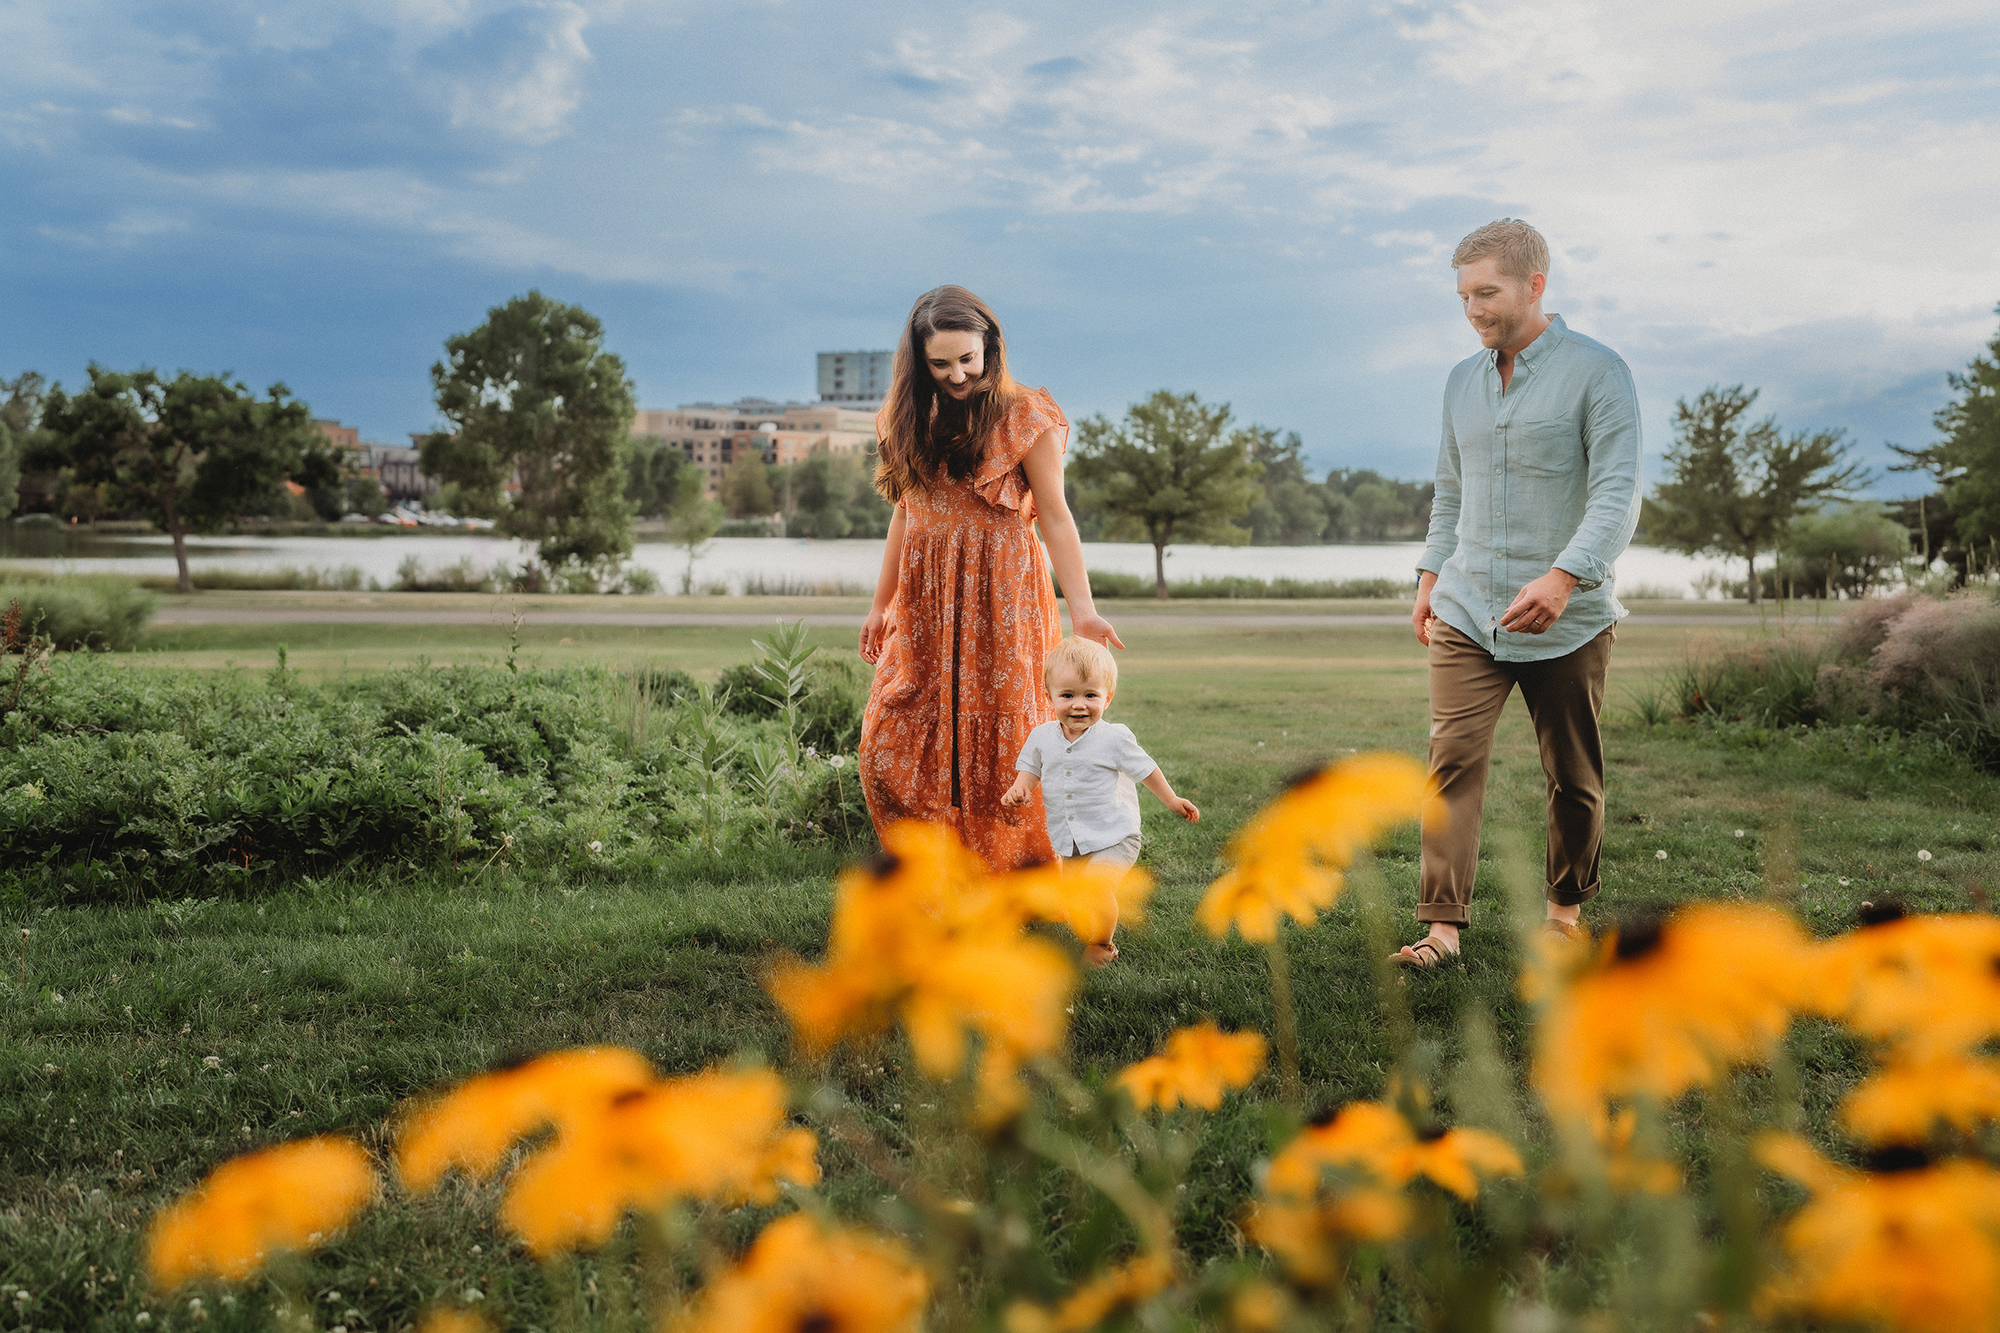 denver family photographers captures outdoor family pictures in the summer with african daisies littering a field while mother, father and child walk together exploring the location